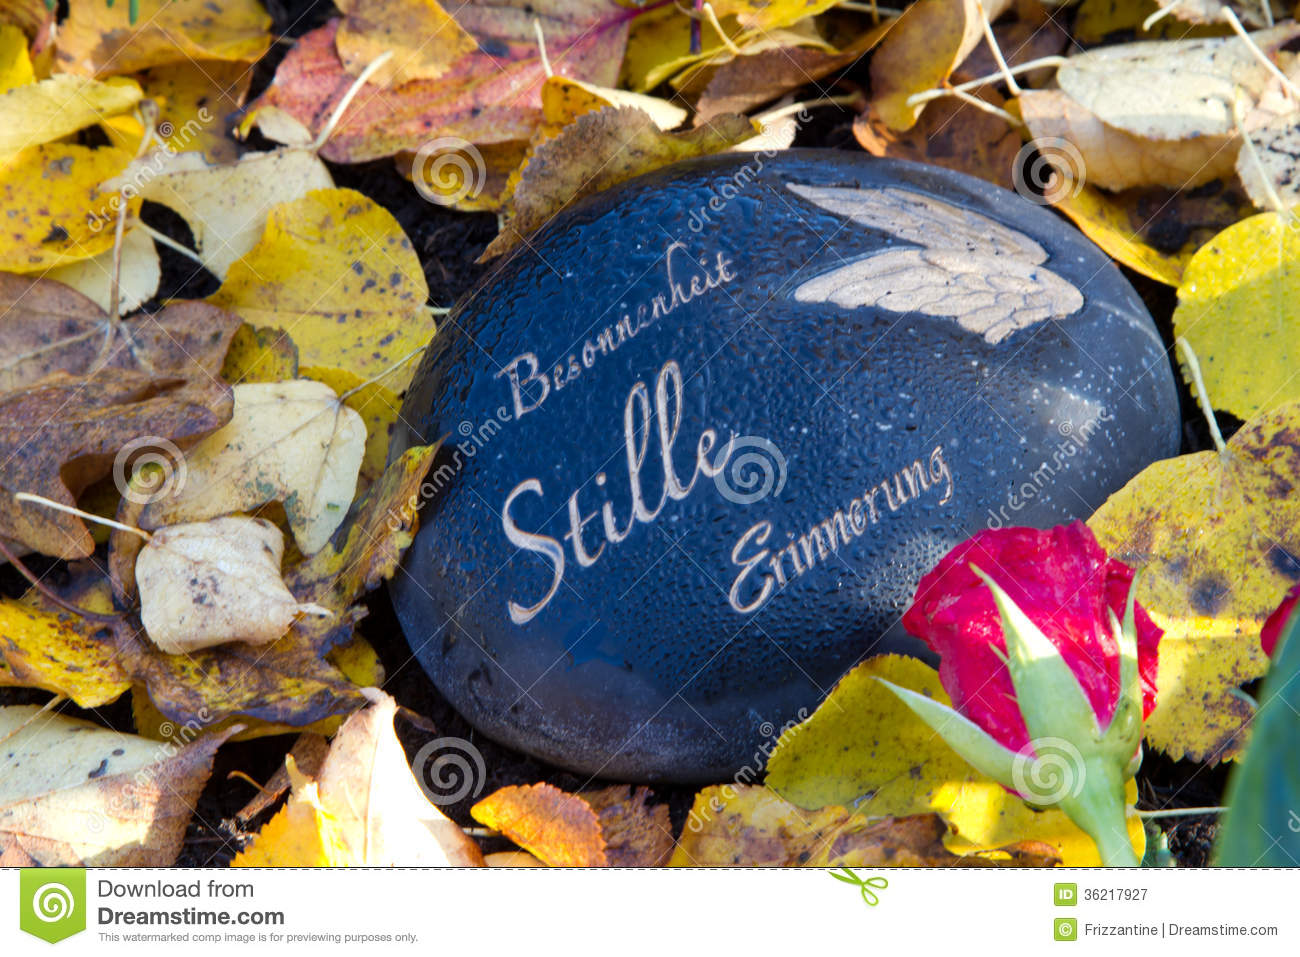 Black Grave Stone In Autumn With German Words Royalty Free Stock